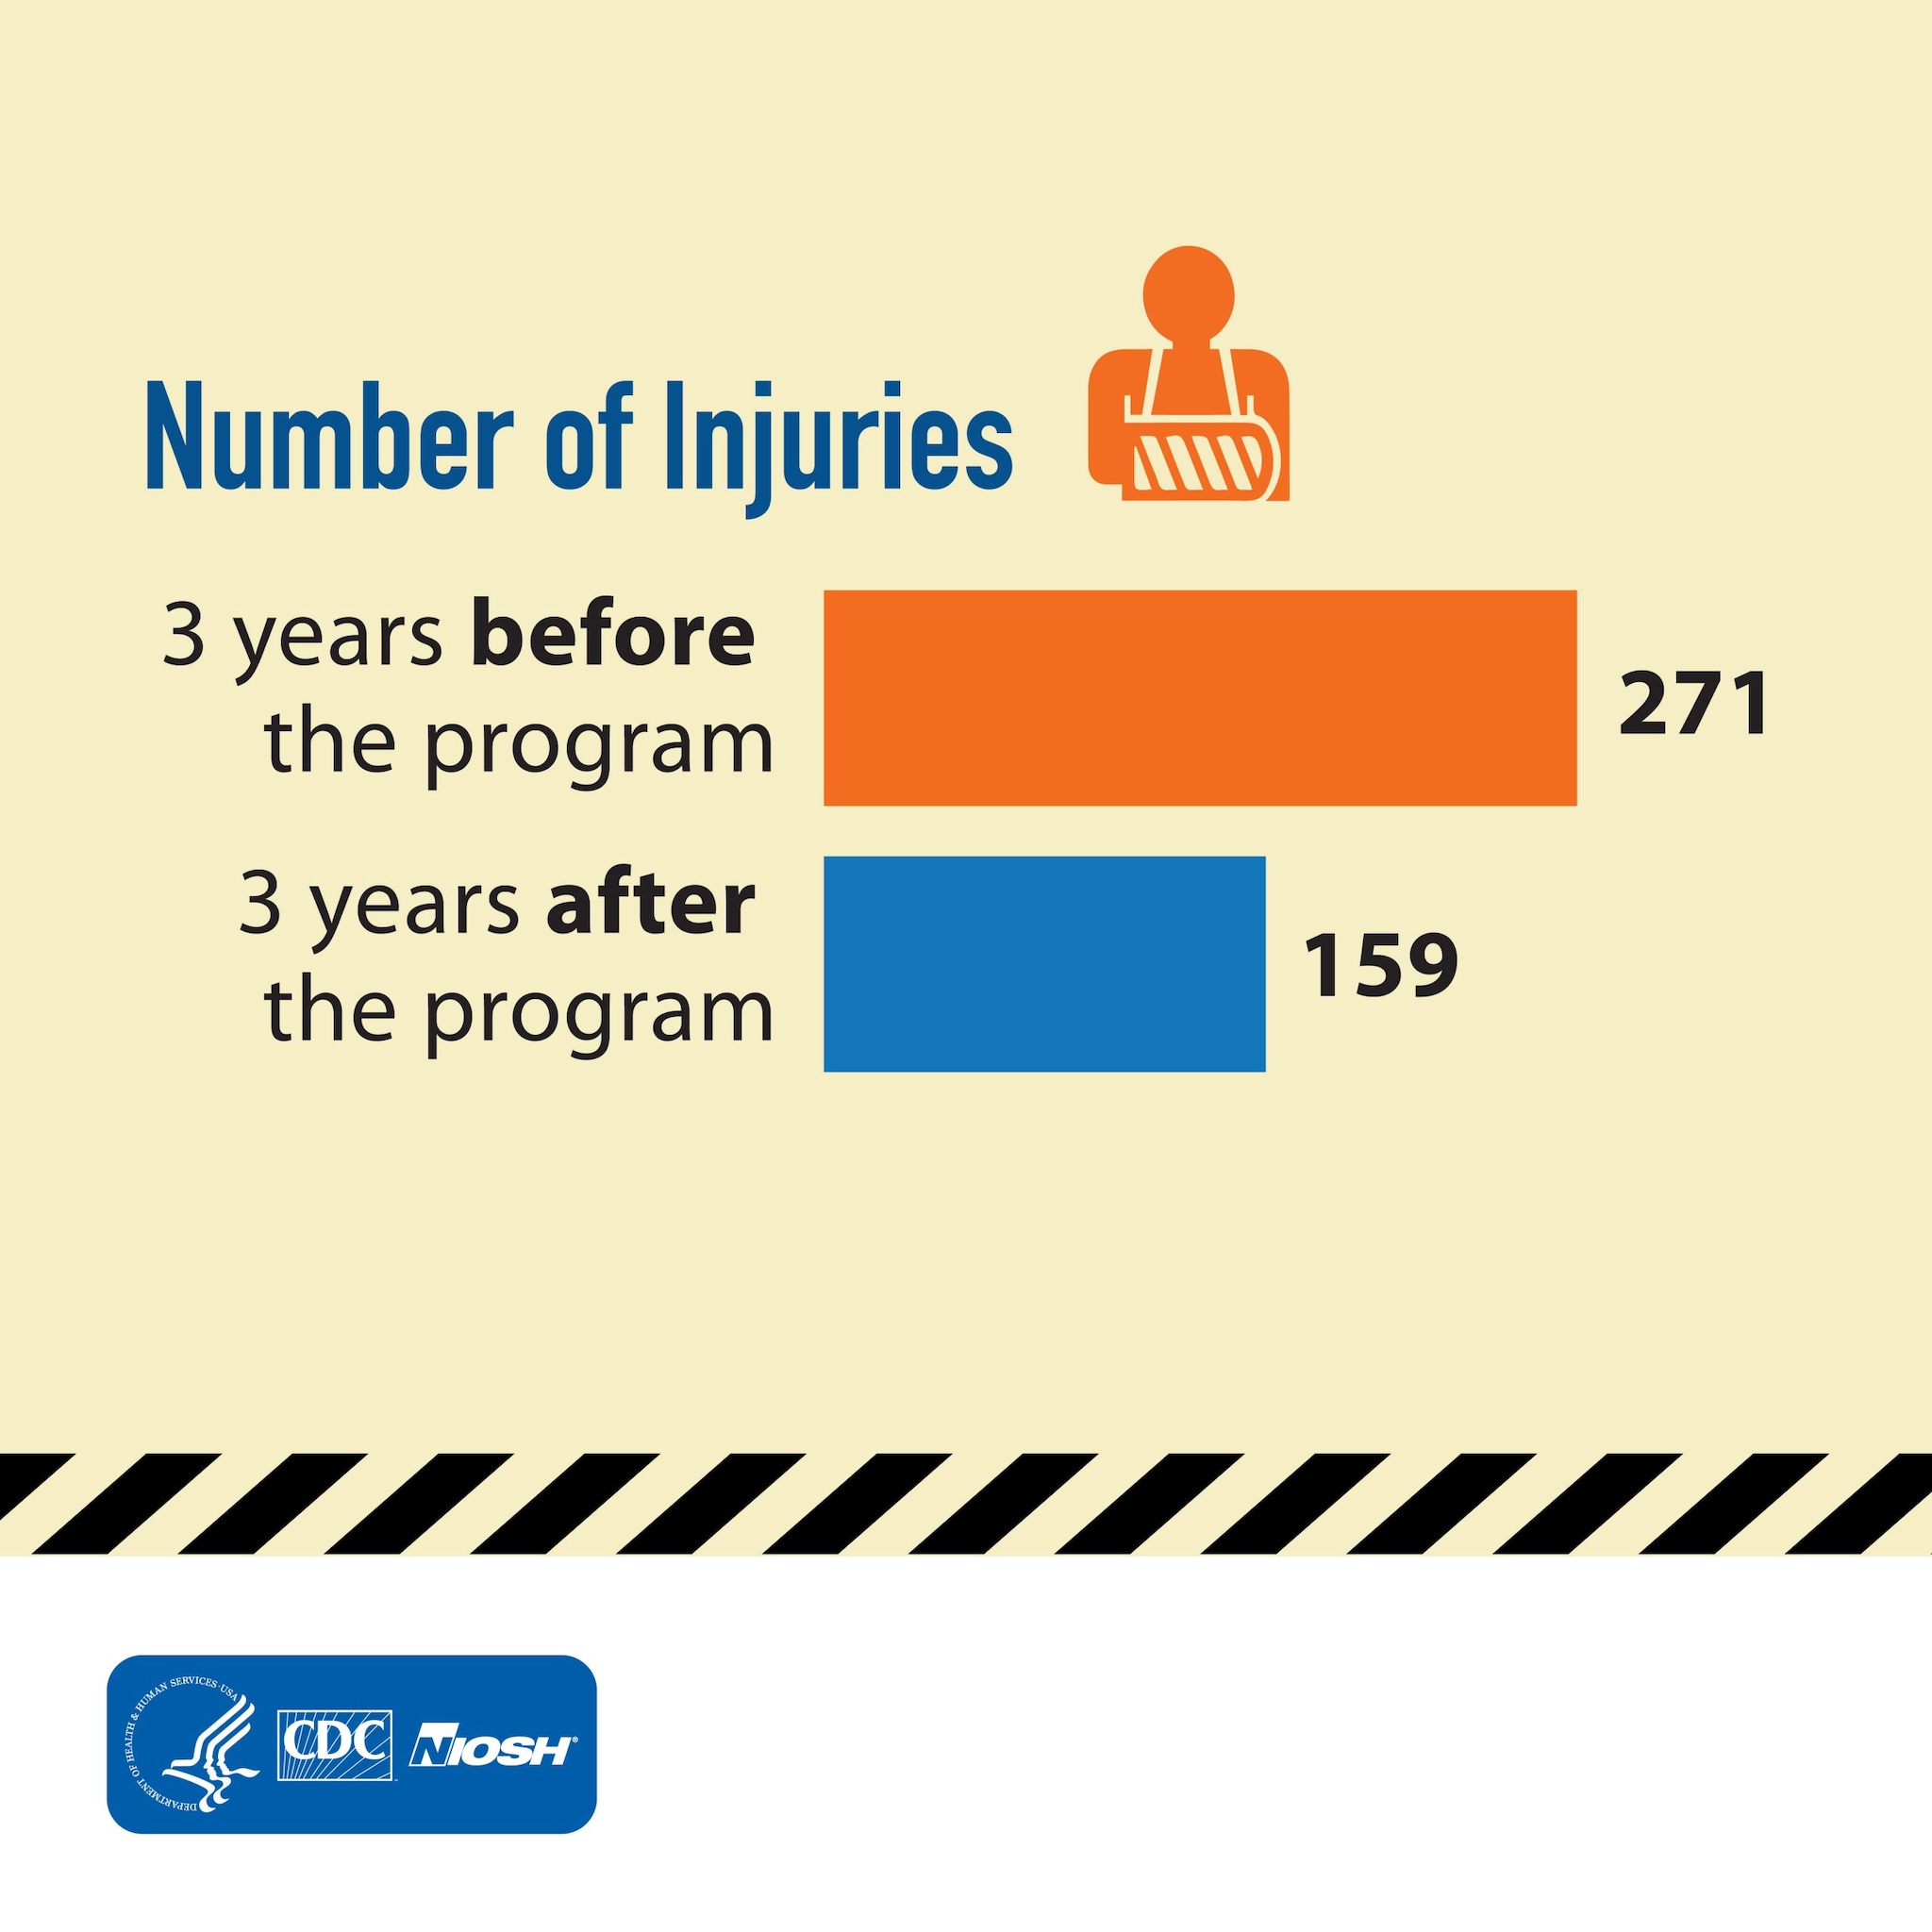 A Safe Driving Program: Number of Injuries: 3 years before the program = 271 - 3 years after the program = 159